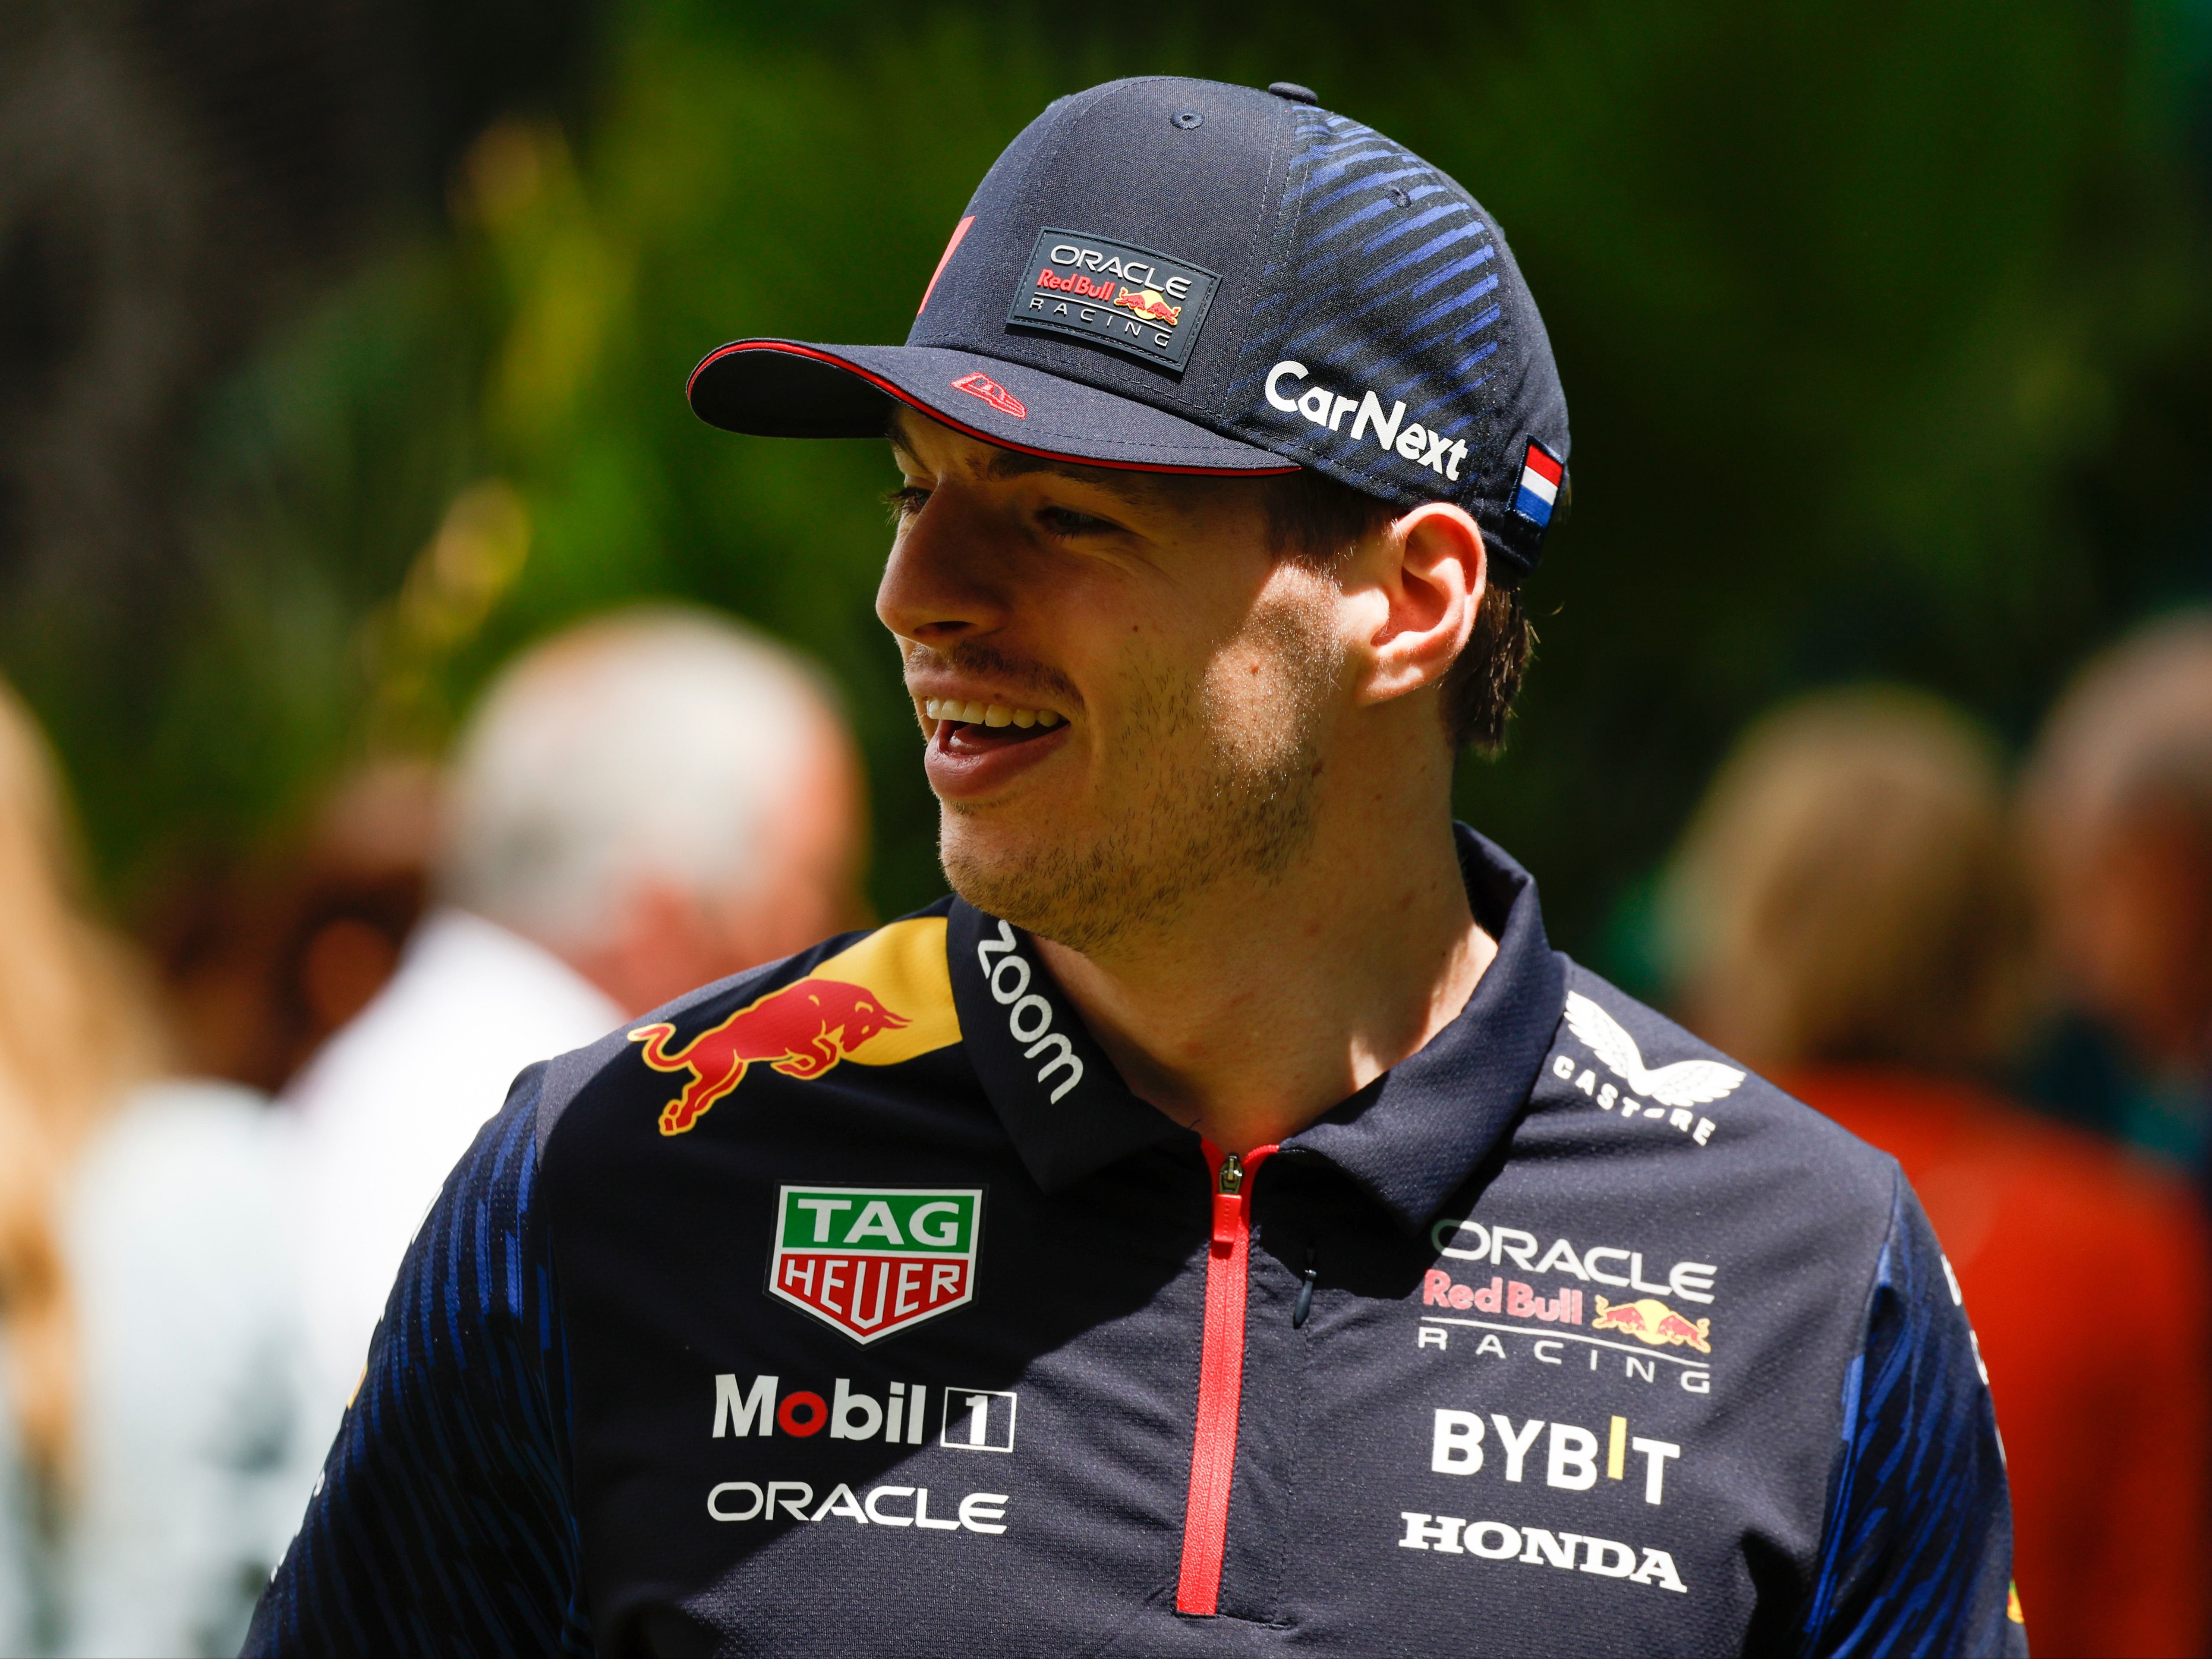 Max Verstappen has been the "best driver" in F1 for the last "3 or 4